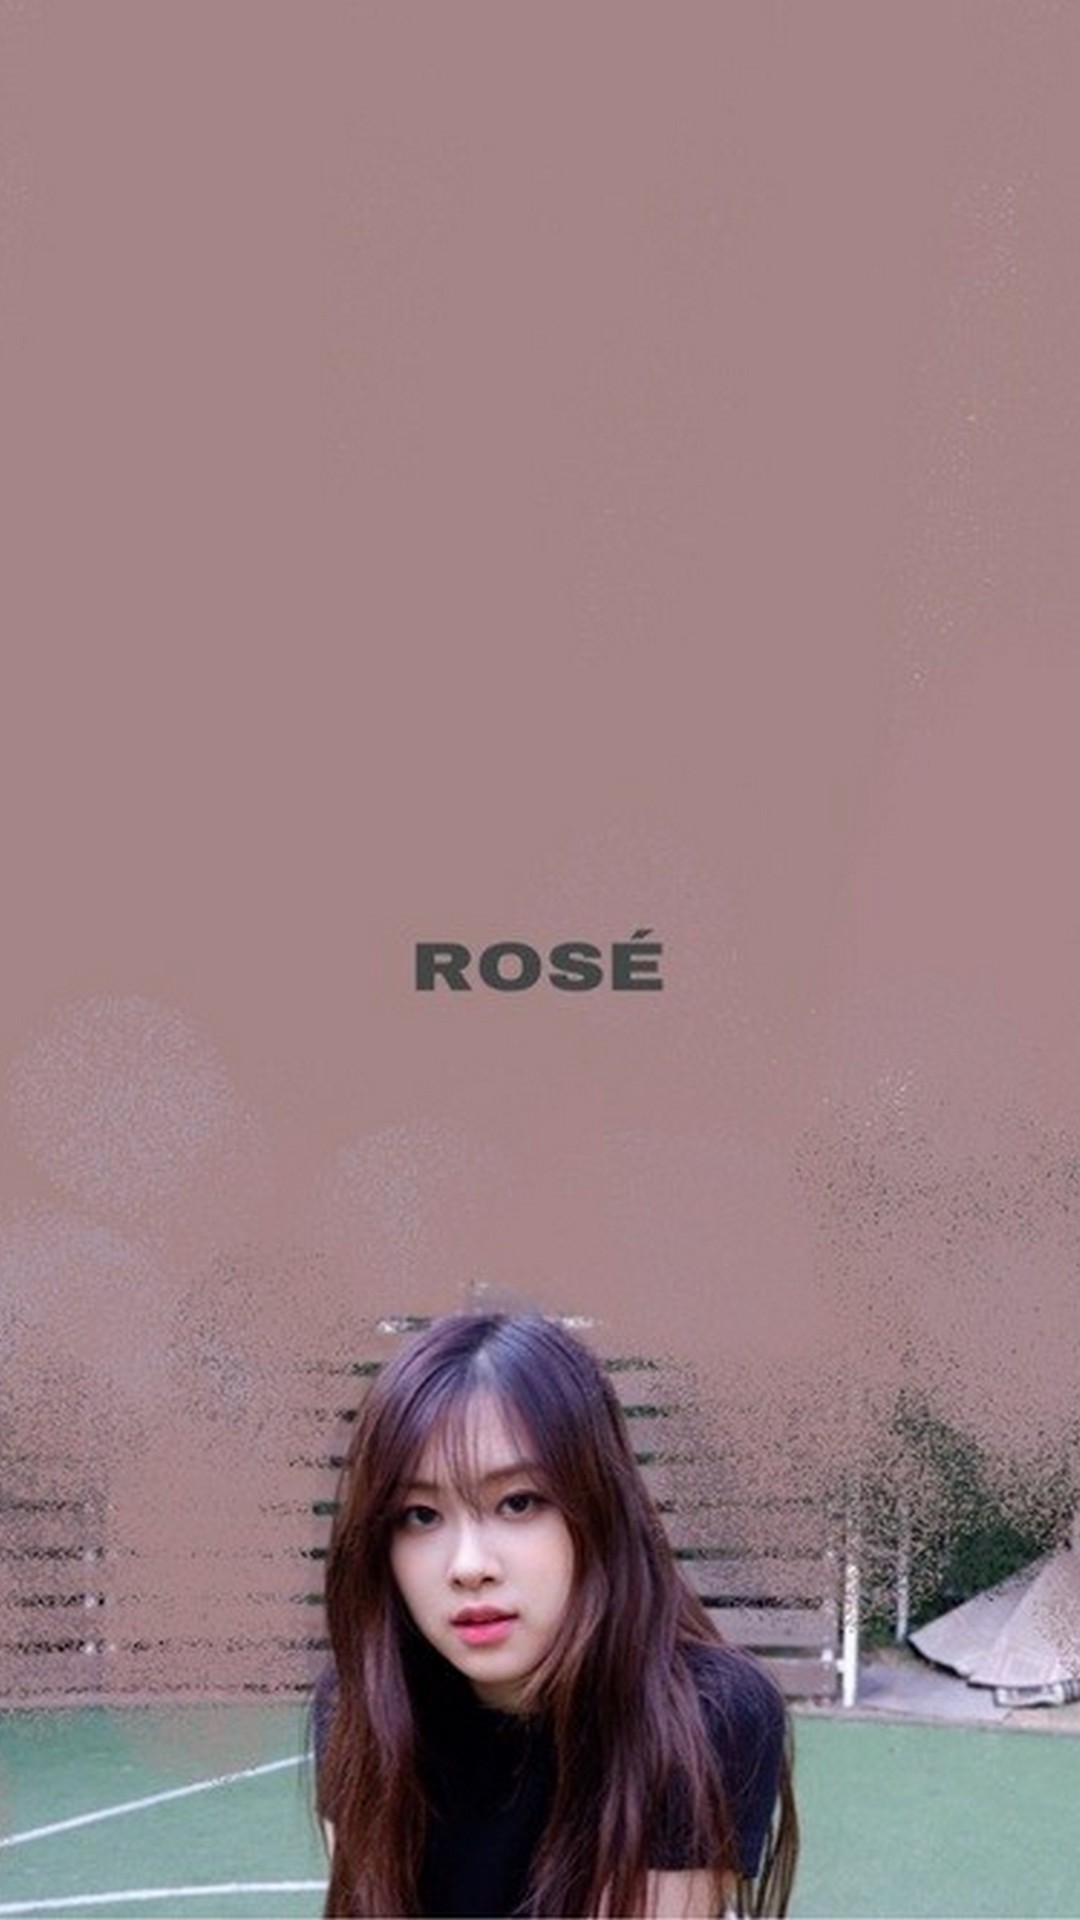 Rose Blackpink iPhone Wallpaper with high-resolution 1080x1920 pixel. You can set as wallpaper for Apple iPhone X, XS Max, XR, 8, 7, 6, SE, iPad. Enjoy and share your favorite HD wallpapers and background images